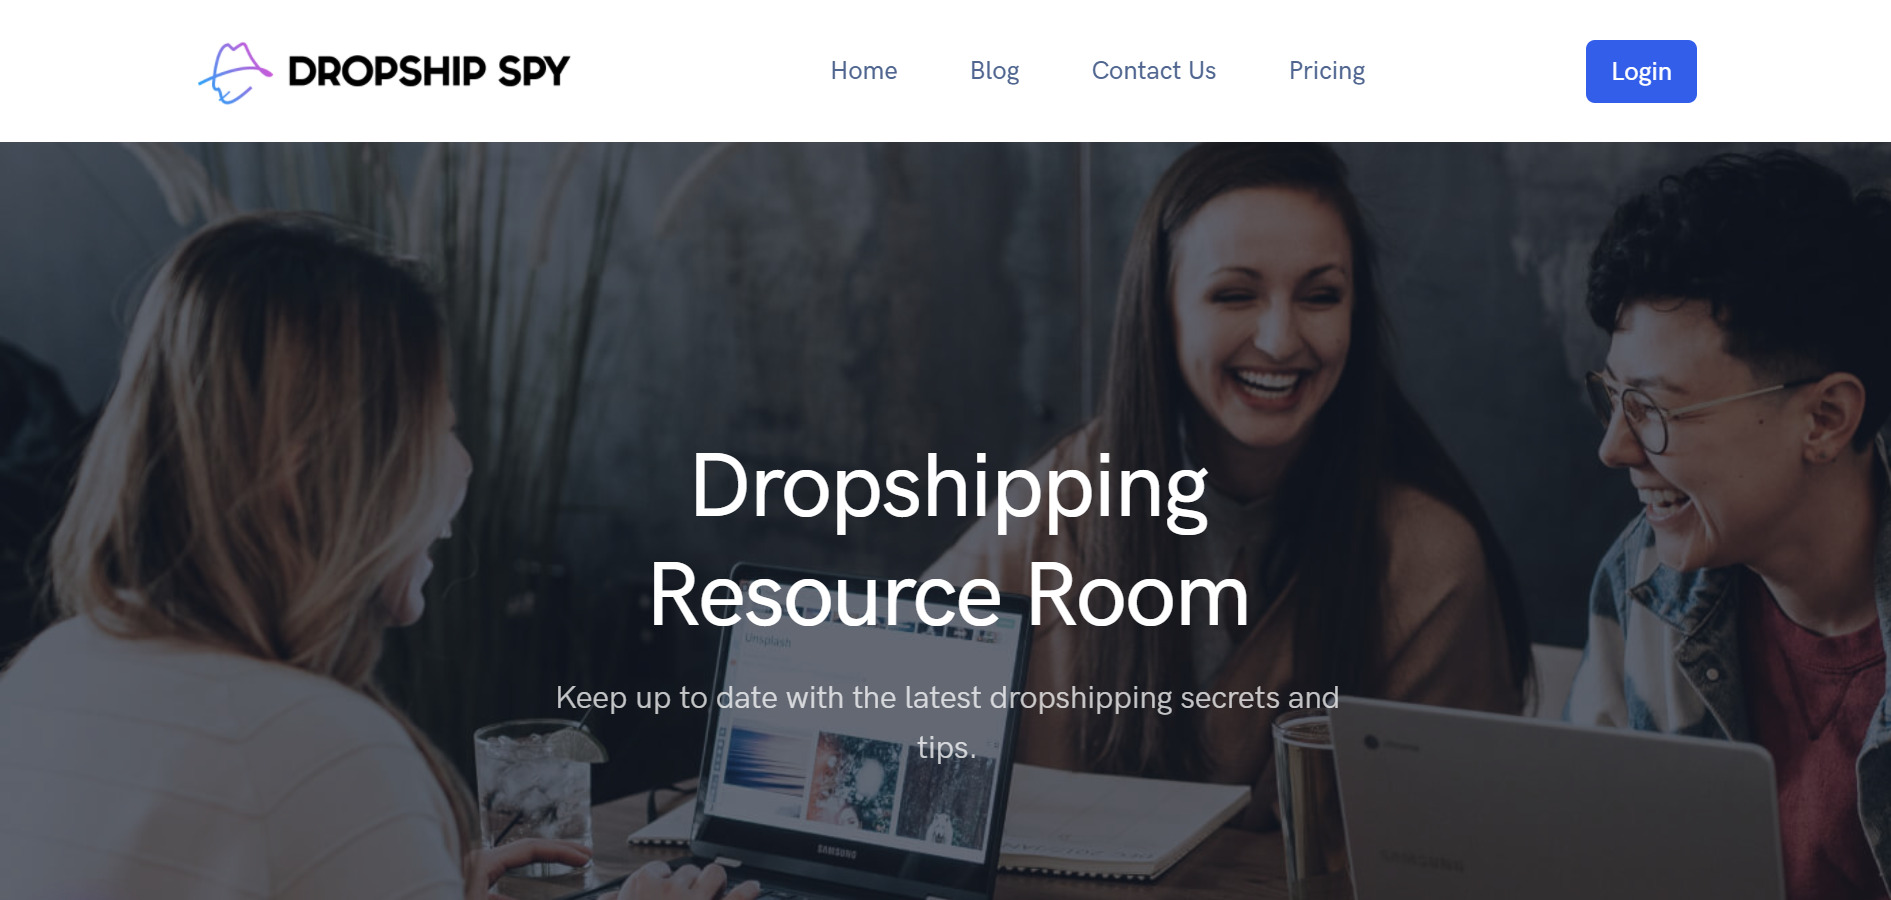 What is the Dropship Spy?